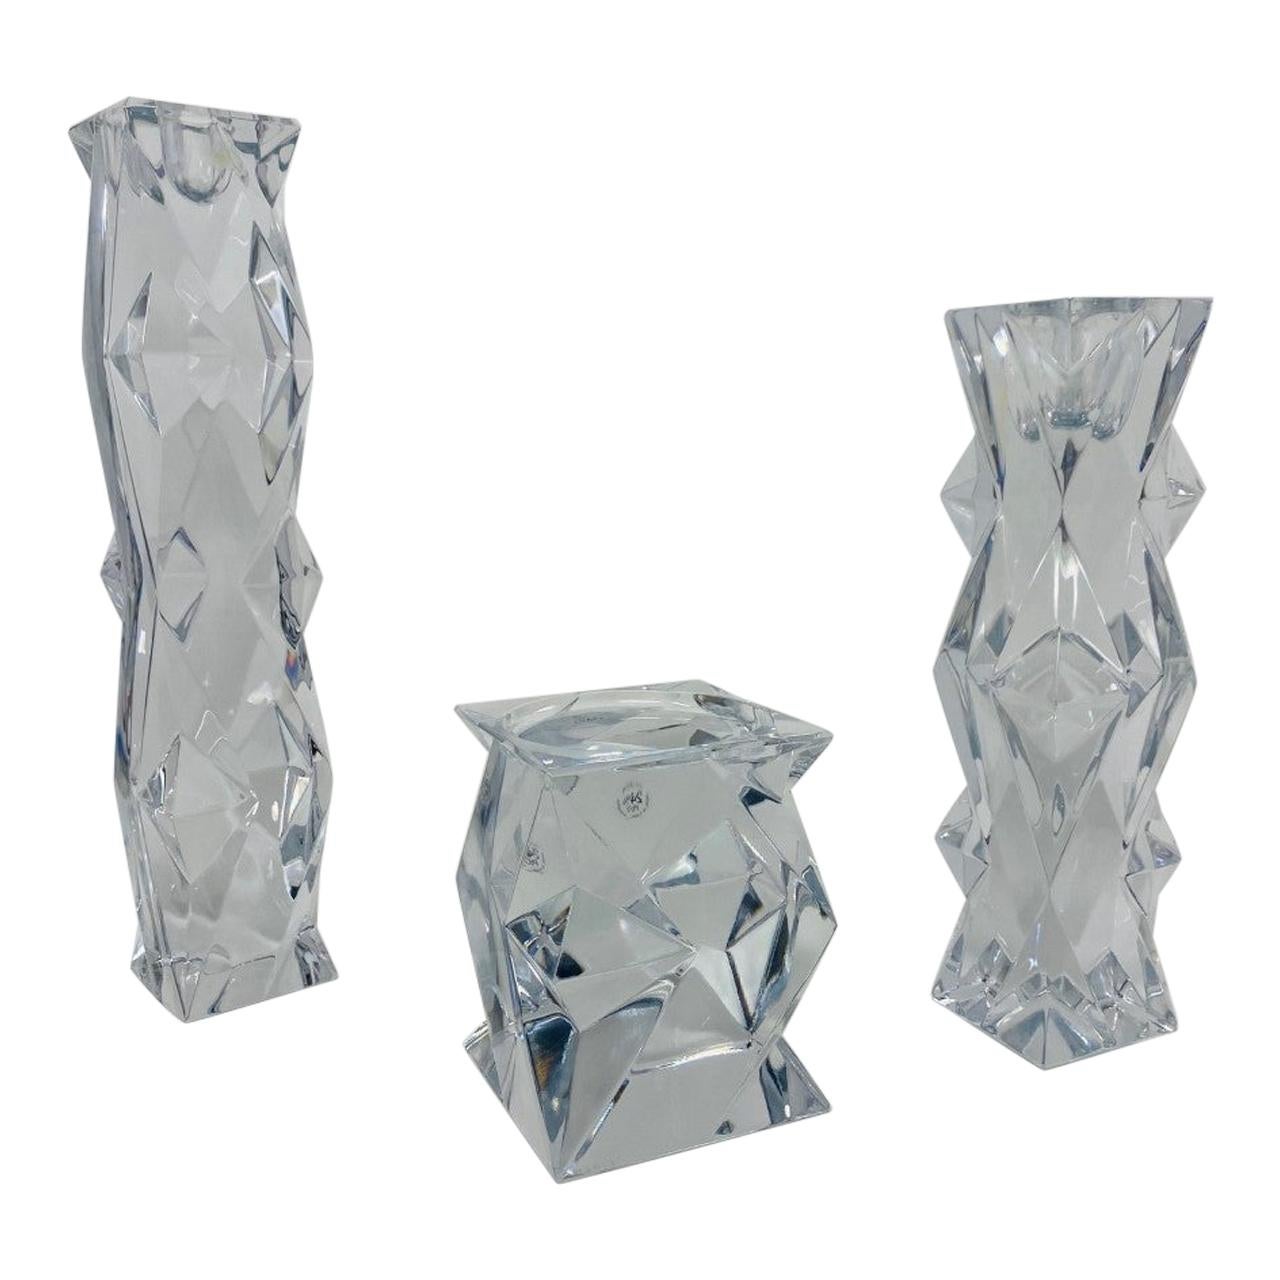 Vintage Stylized Lead Crystal Candle Holder Set of 3 by Libera Czech